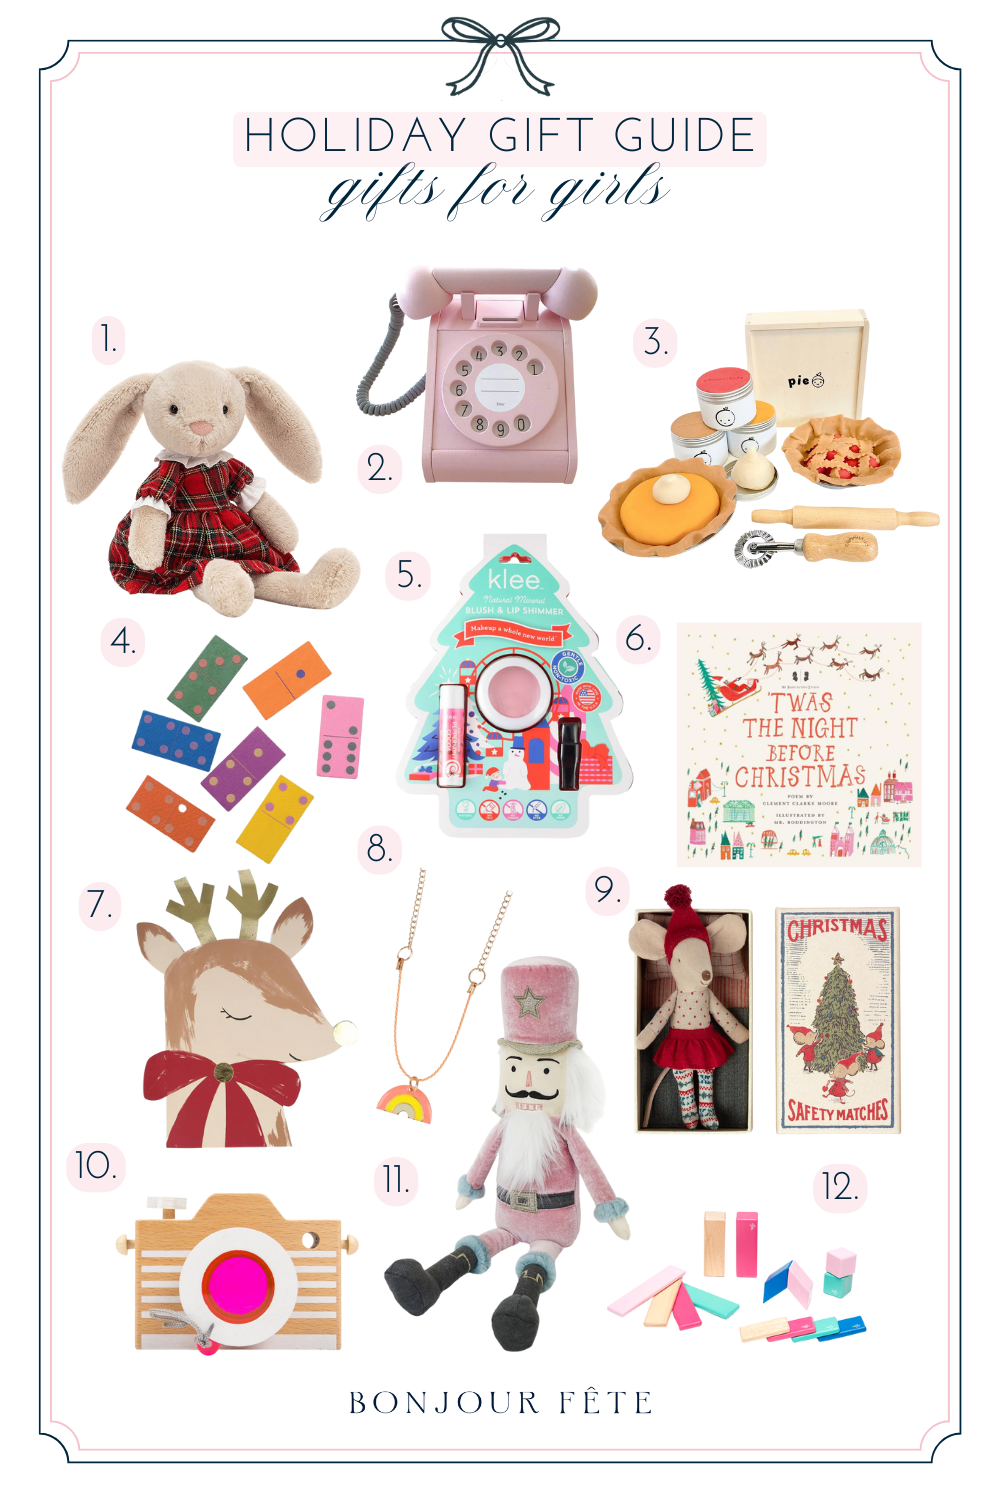 Holiday gift guide for girls.